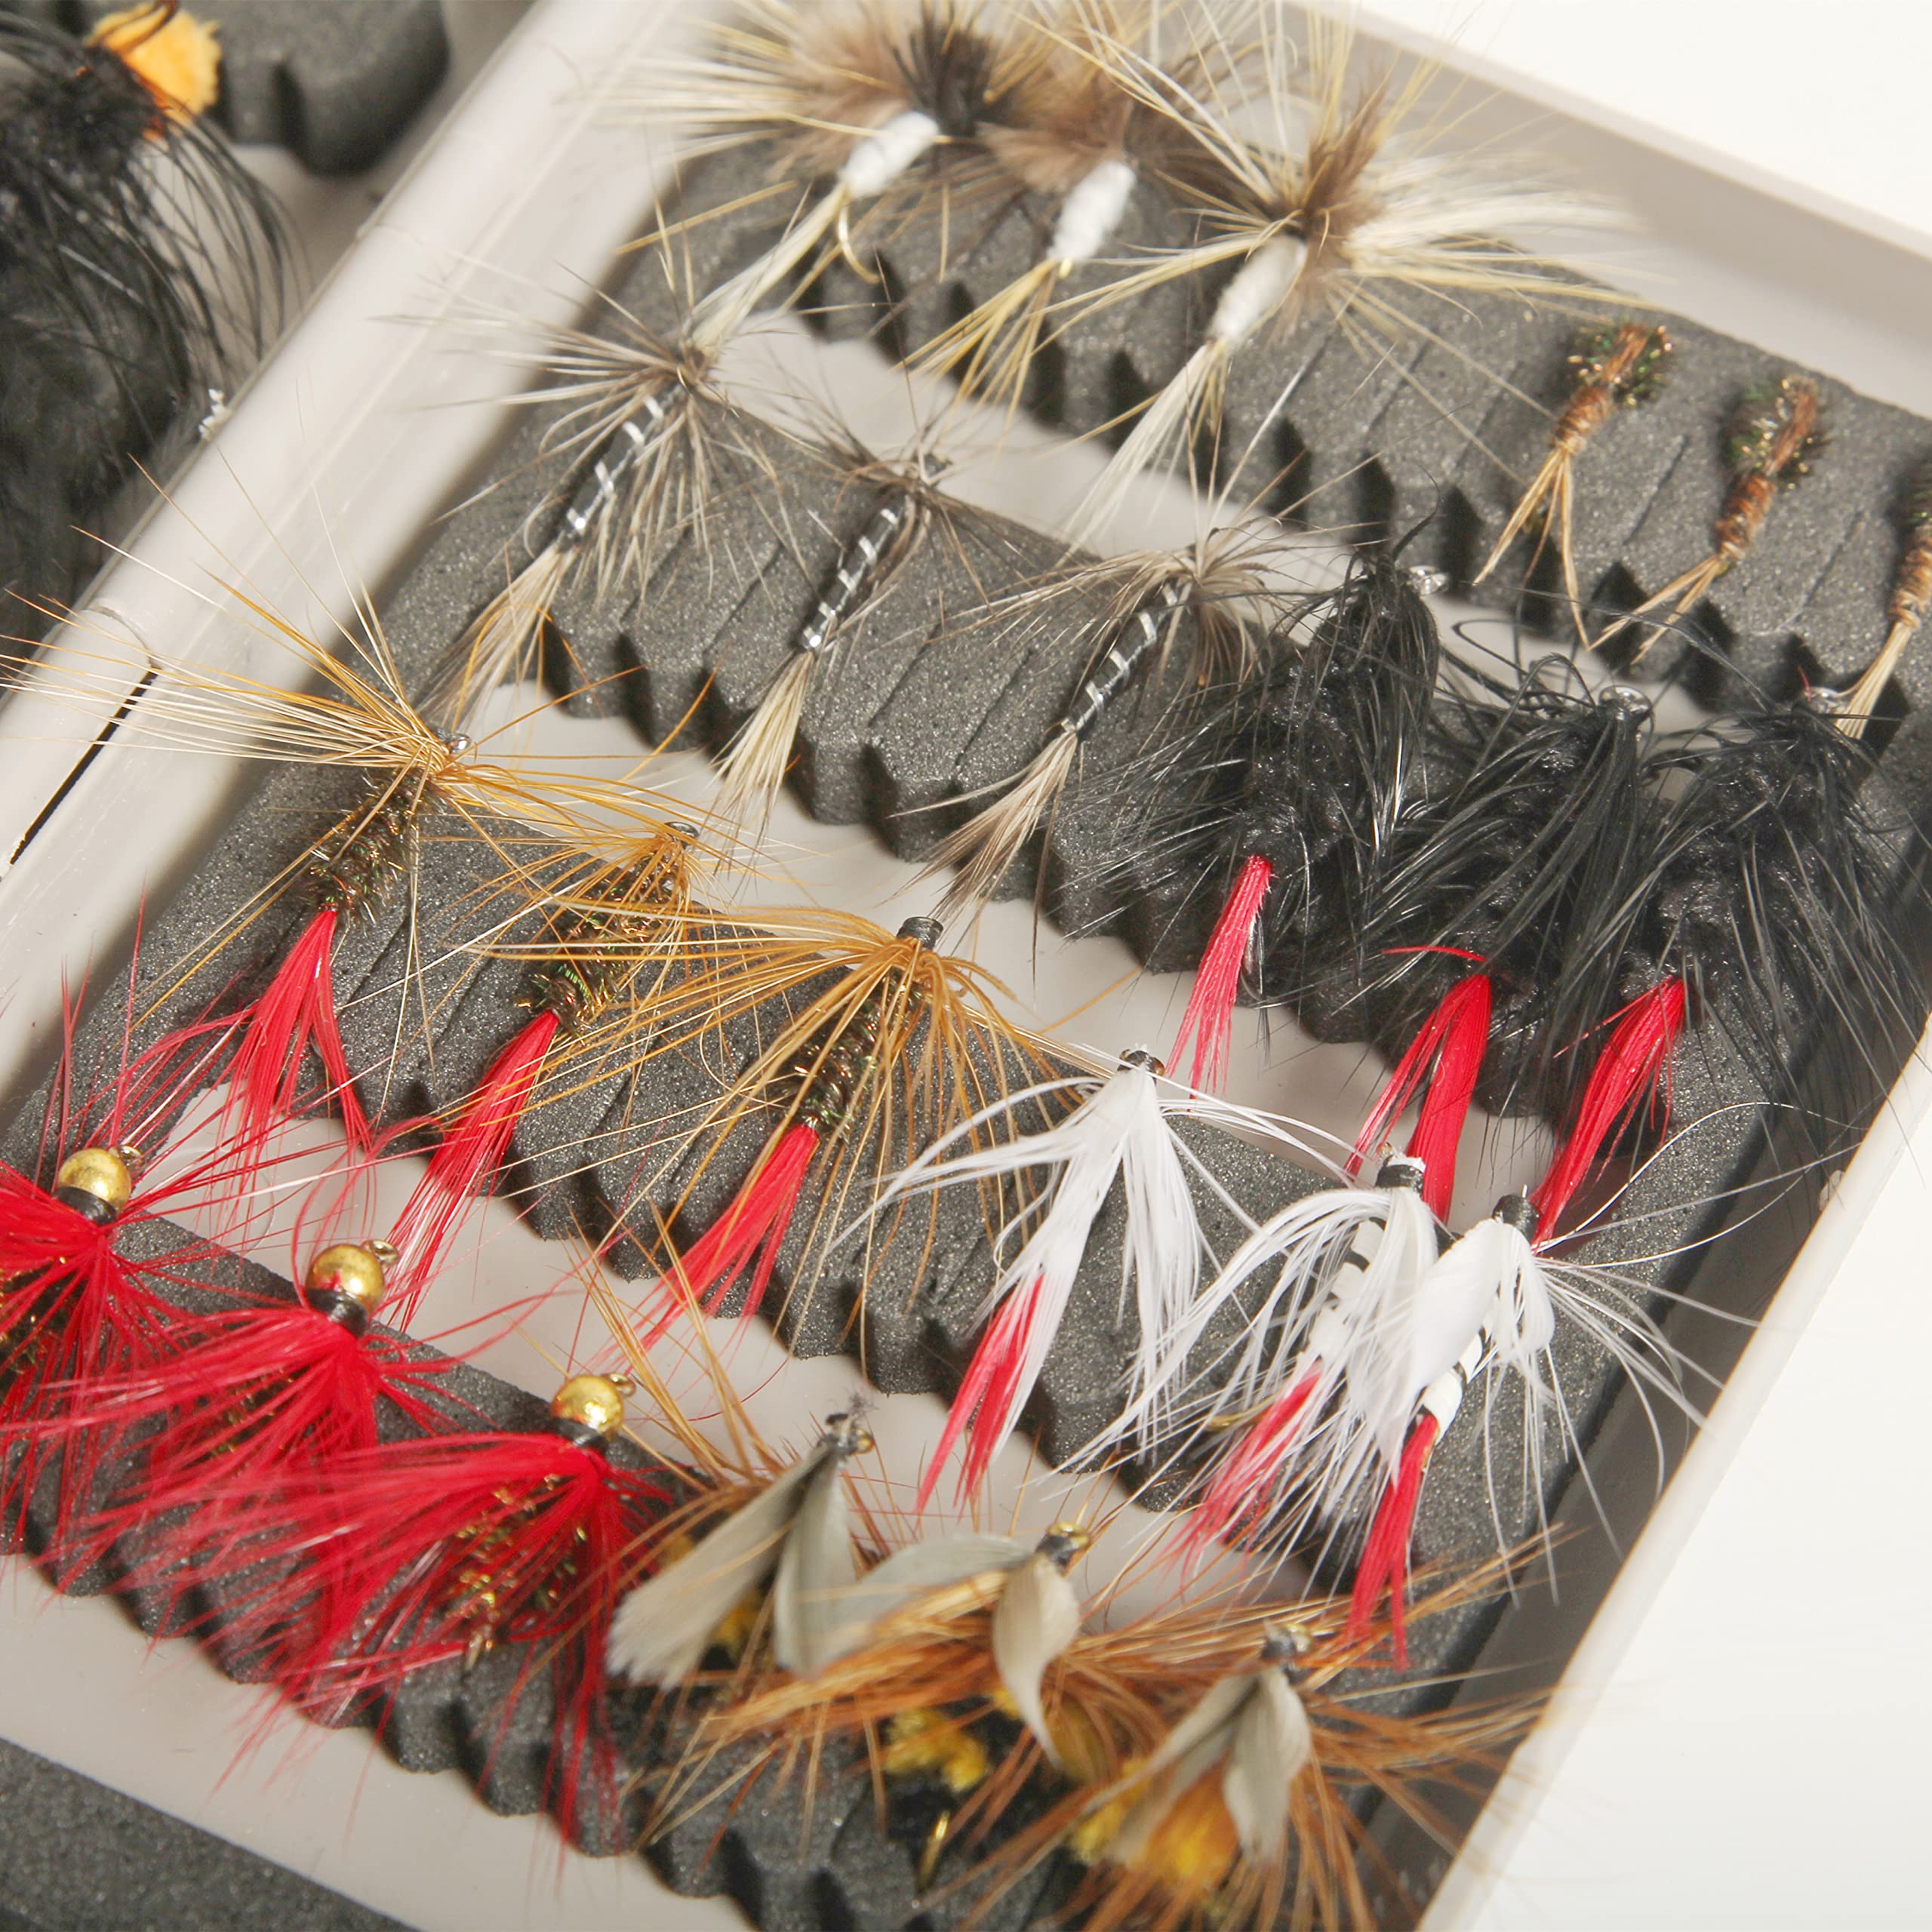 MNFT Handmade Fly Fishing Flies Kit 40/Dry Wet Nymph Micro Fishing Lures  For Bass, Trout, And Salmon Bait From Daye09, $10.44